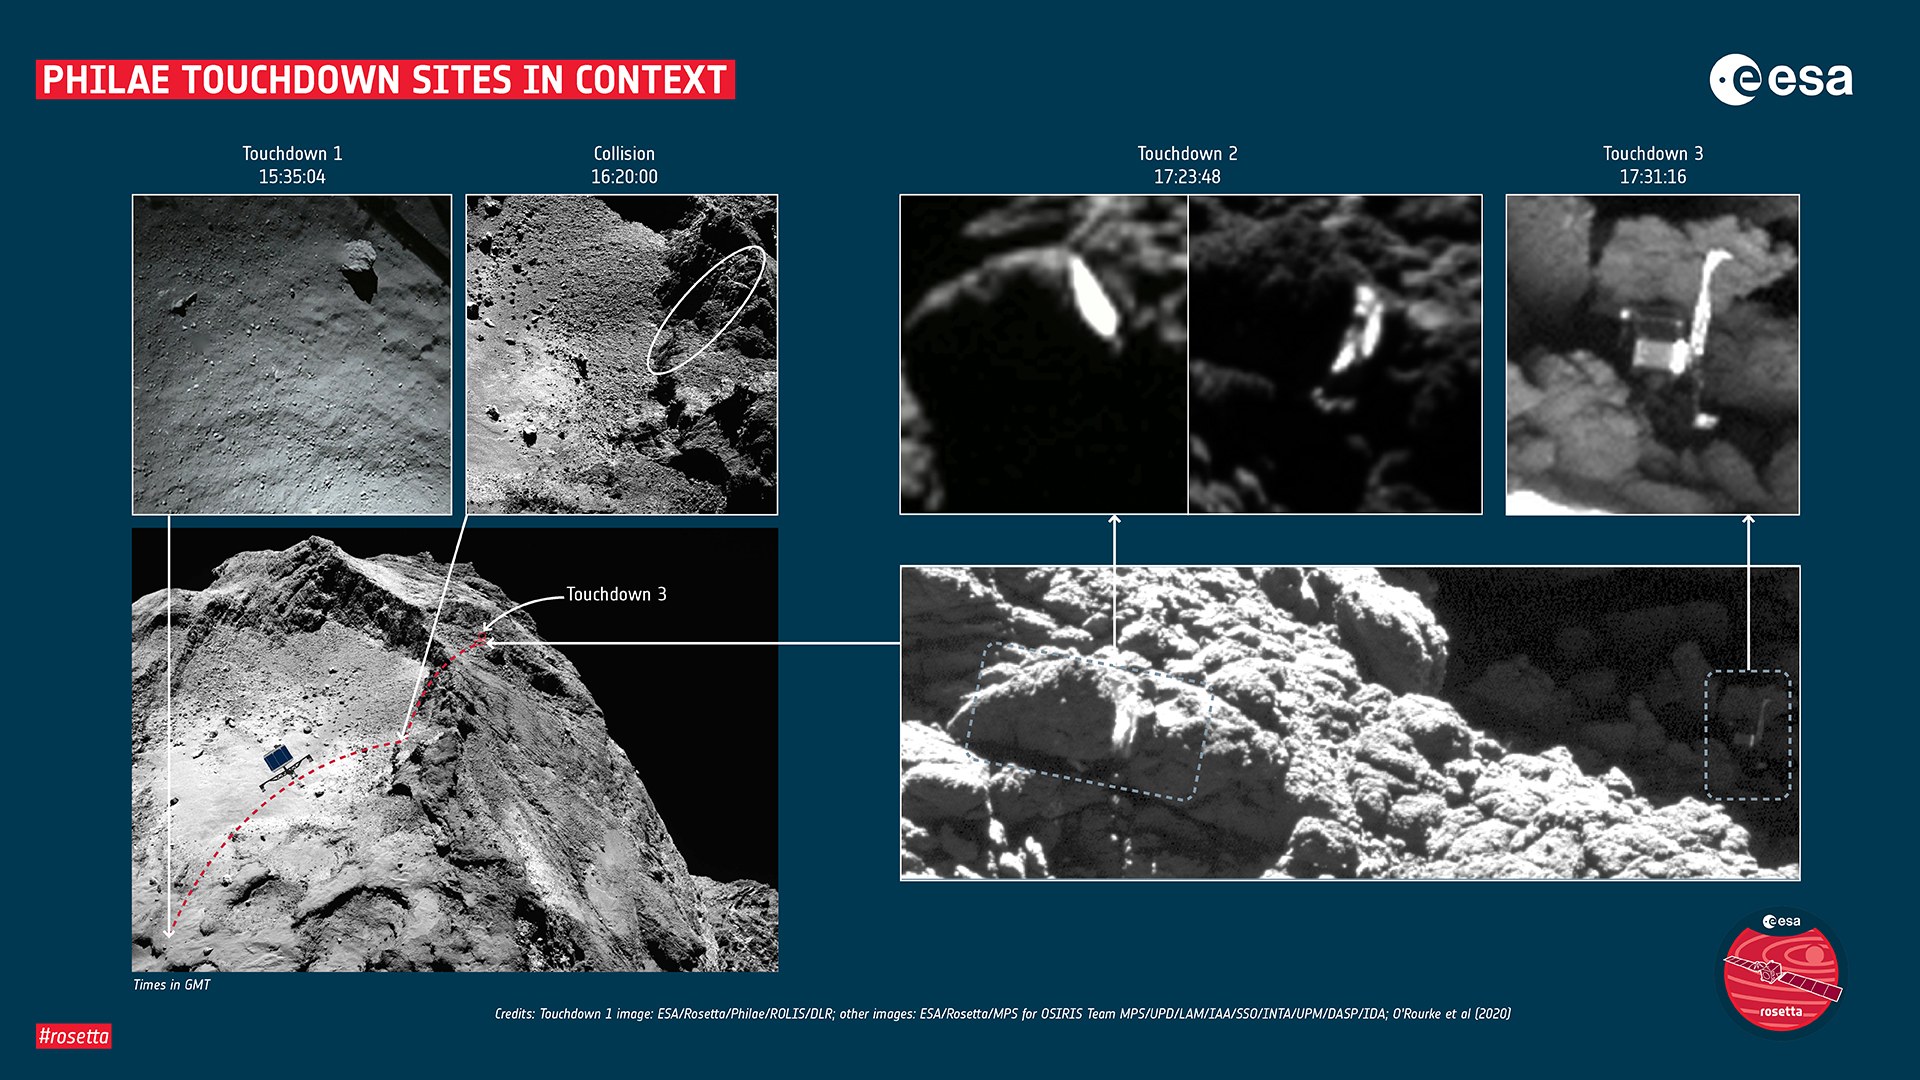 Philae’s contact with the comet put into regional context